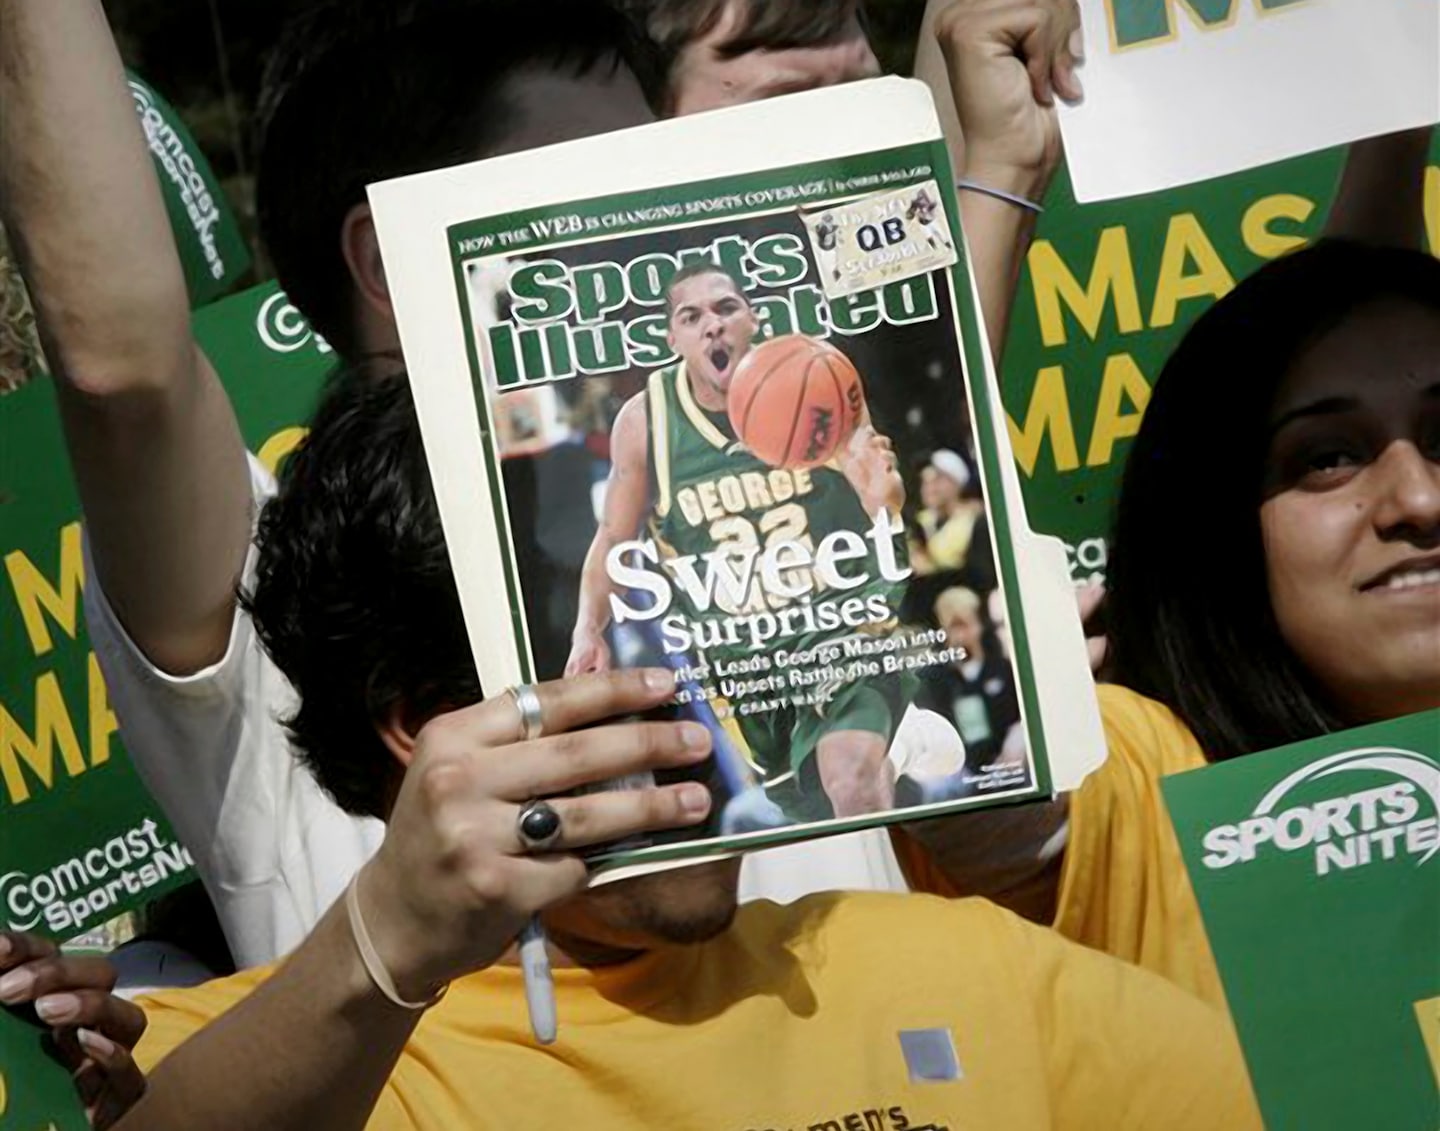 Sports Illustrated union files labor grievance over mass layoffs